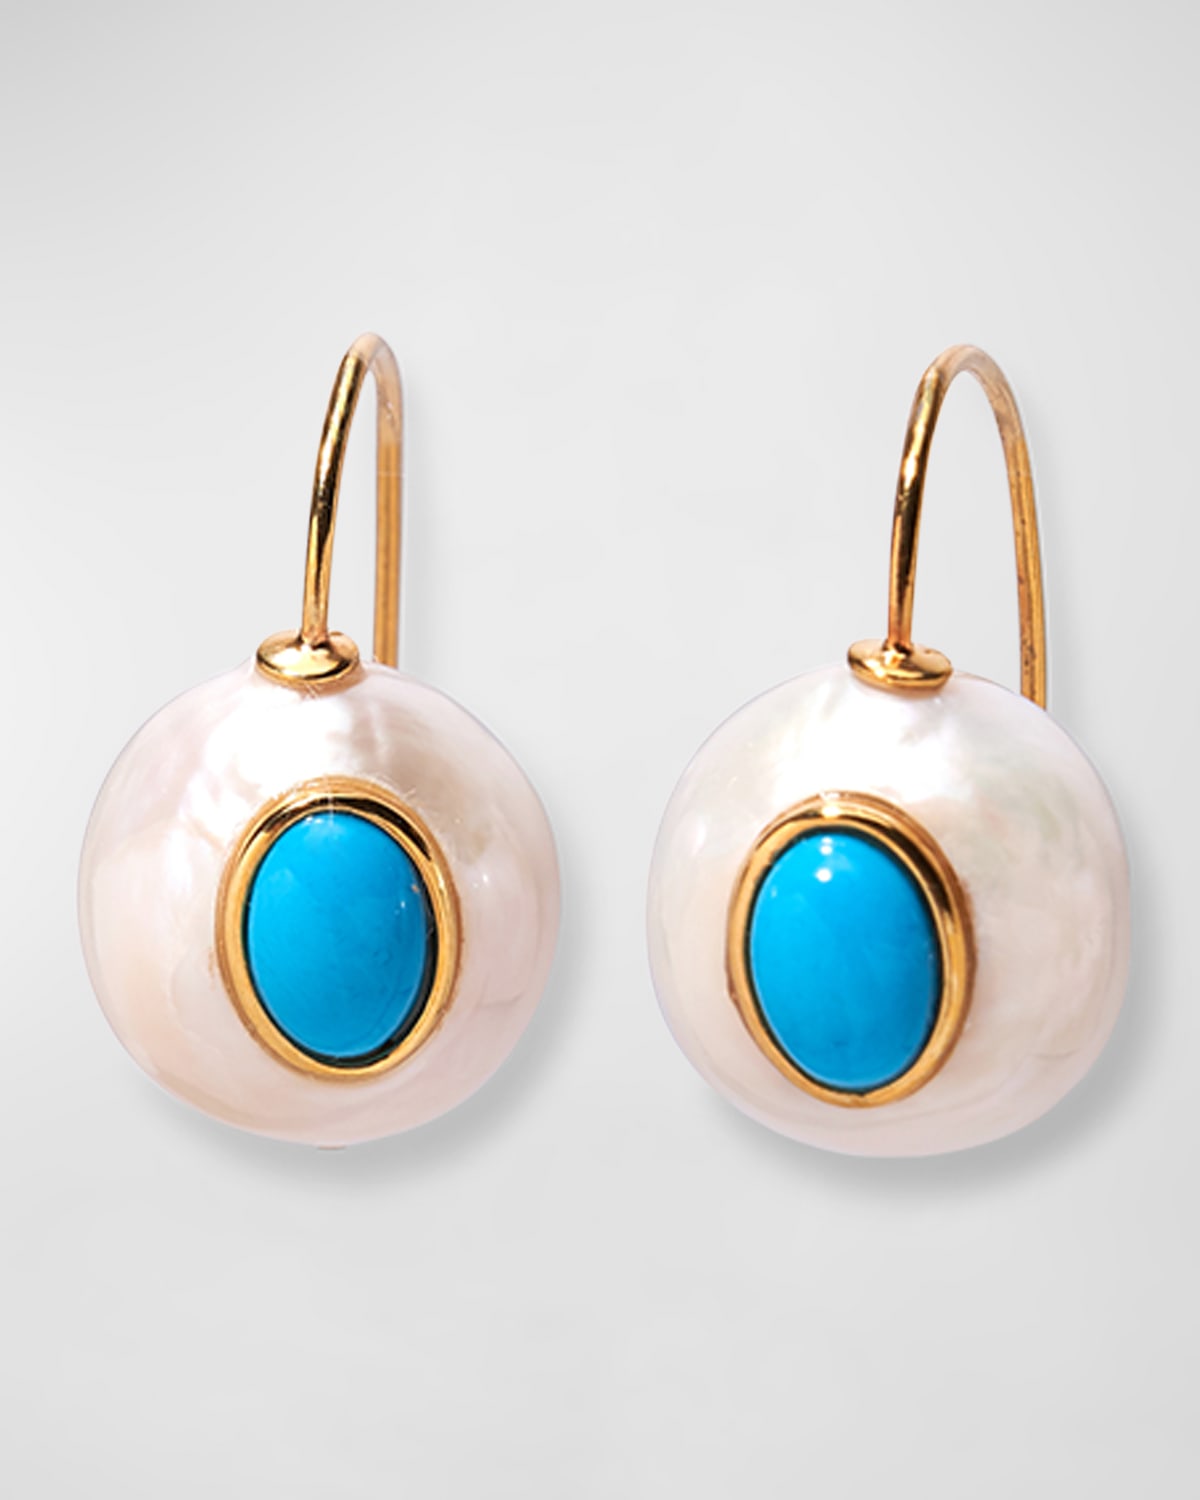 Lizzie Fortunato Pablo 24k Gold Plated Pearl And Turquoise Drop Earrings In Multi